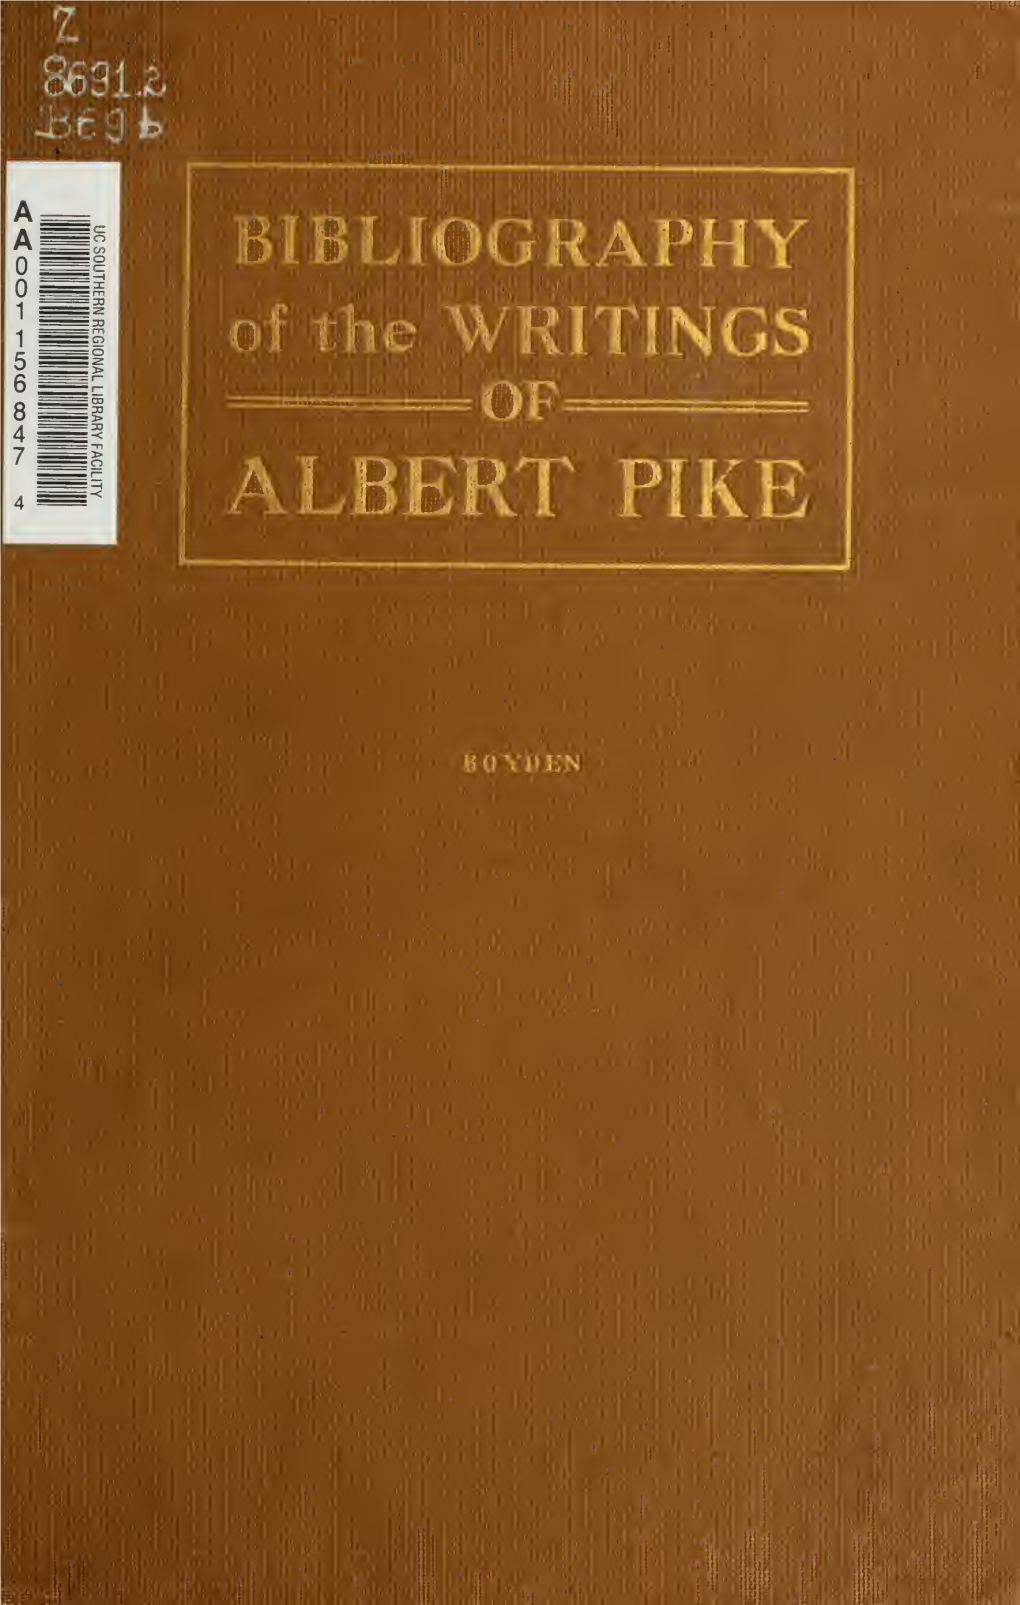 BIBLIOGRAPHY of the WRITINGS of ALBERT PIKE